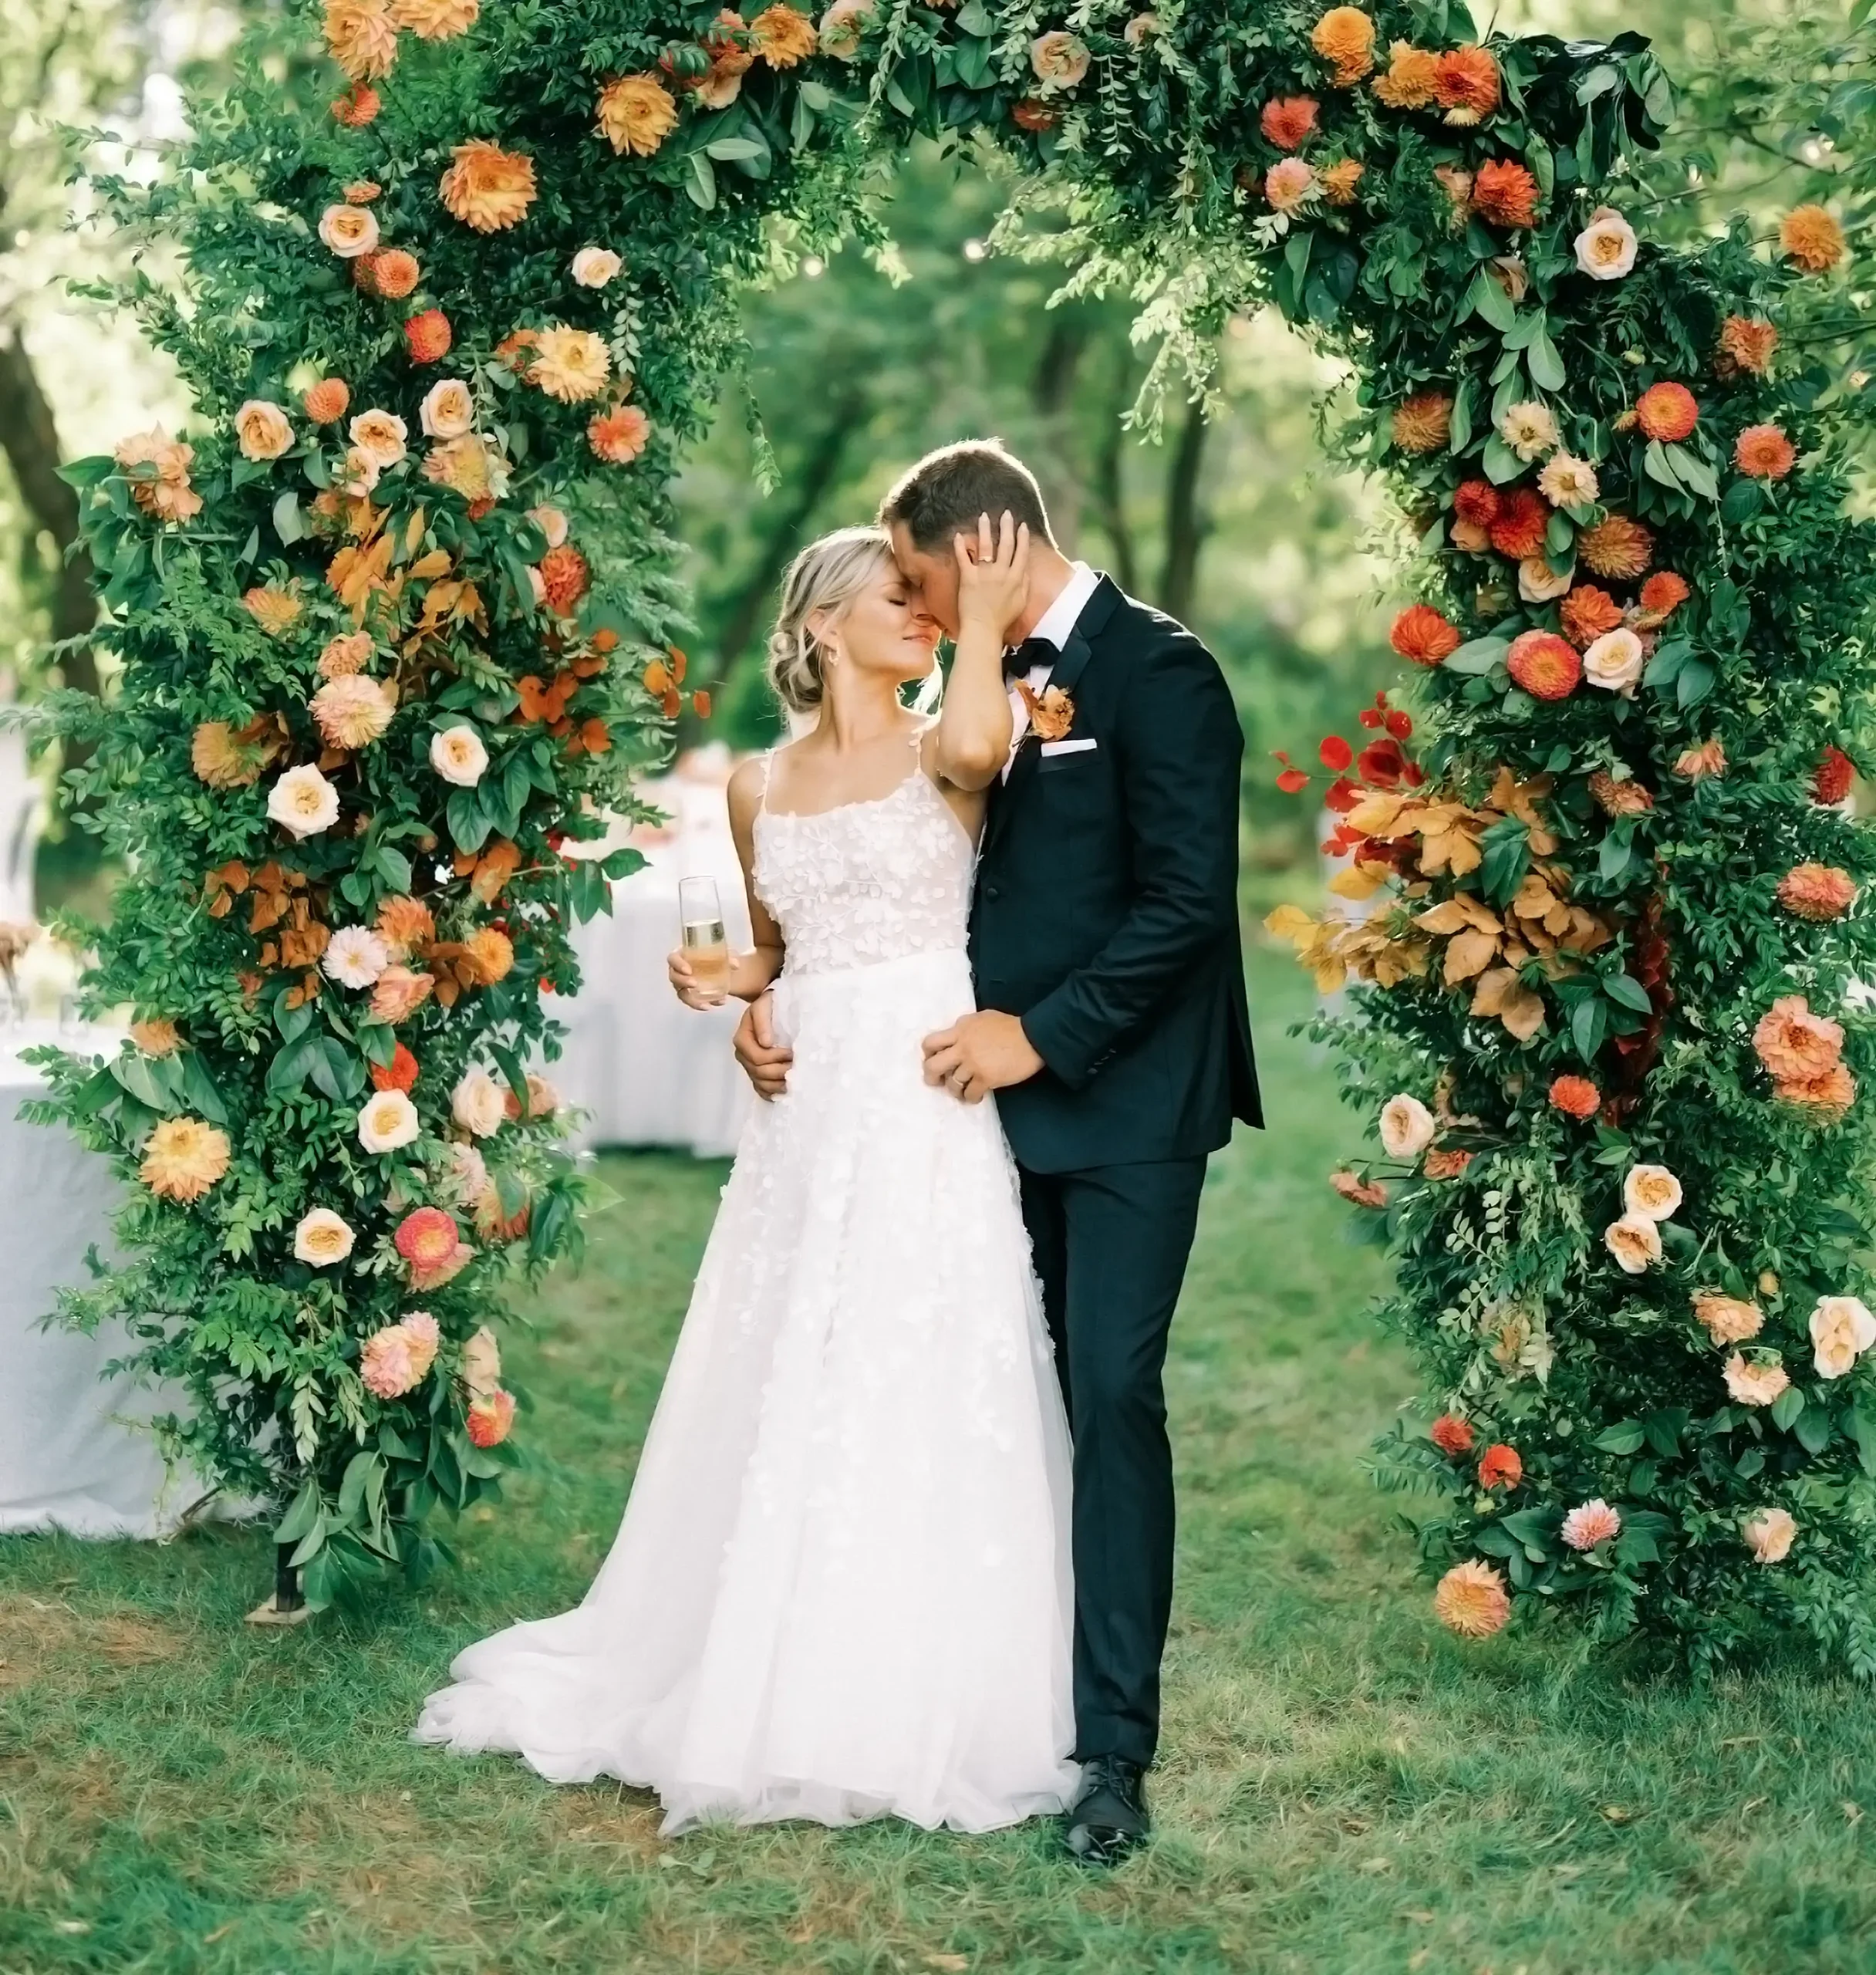 Samantha and sean standing under flowers embracing